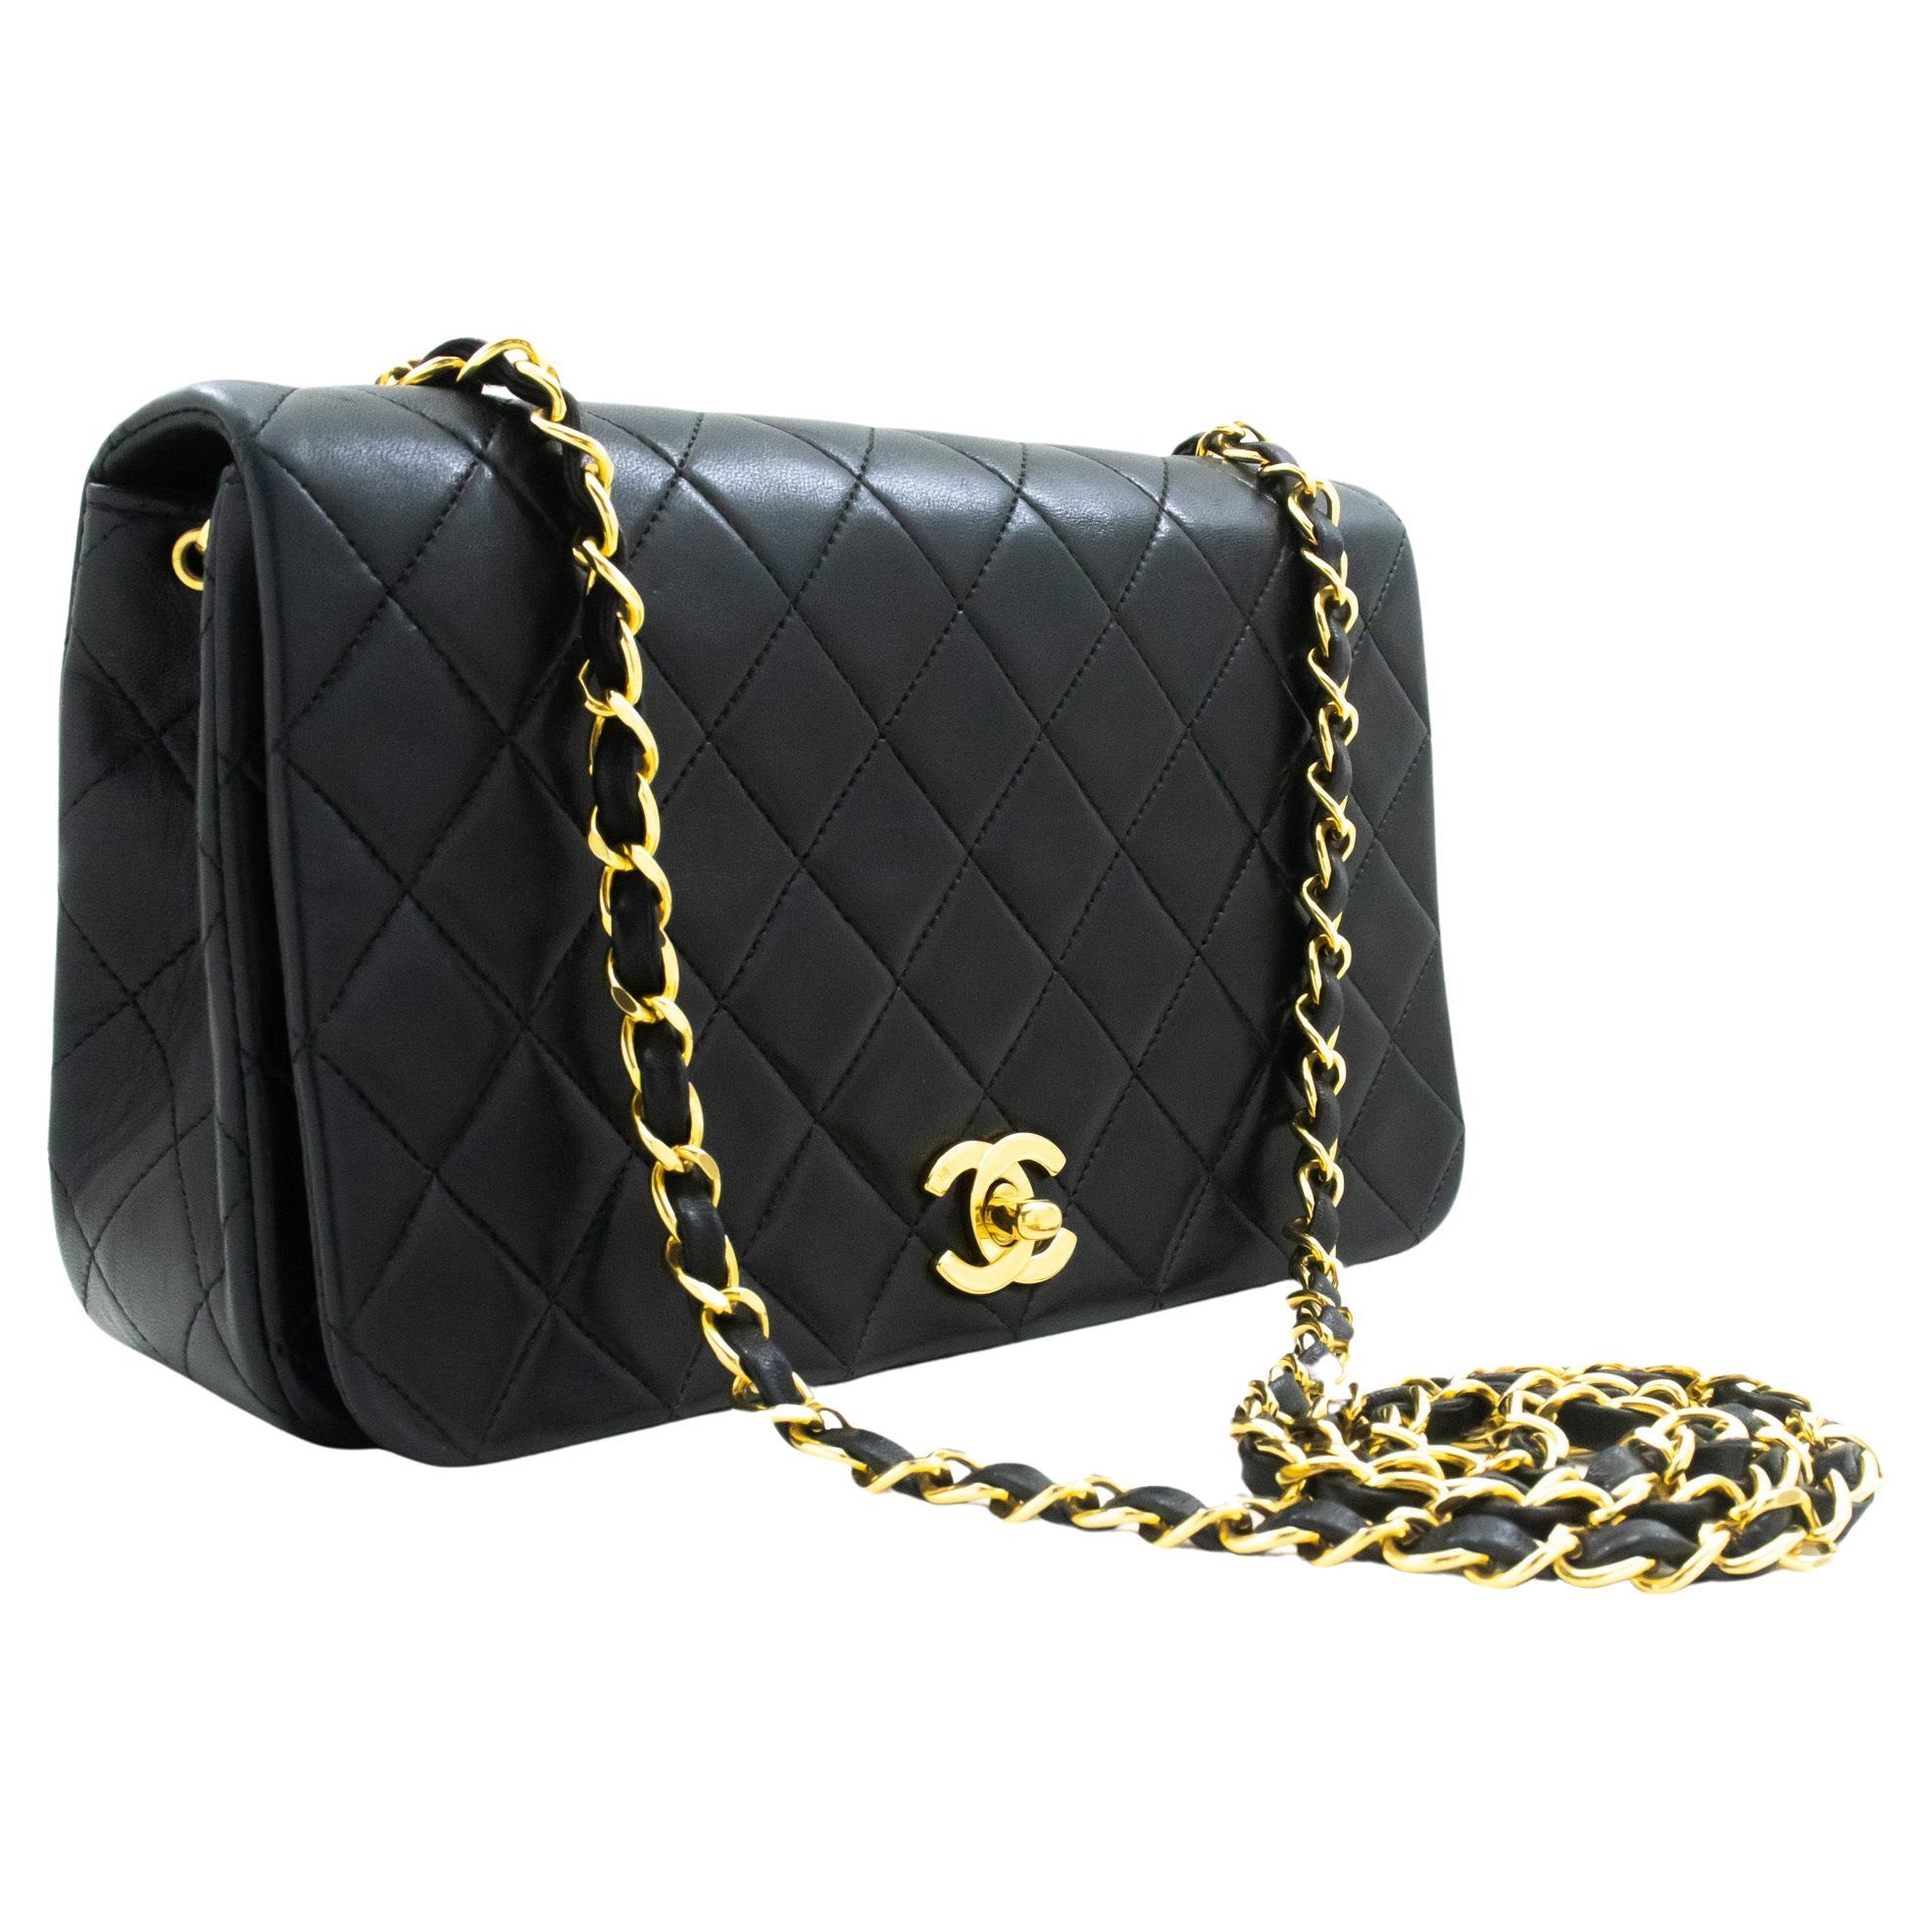 What is the point of the double flap on a Chanel bag?